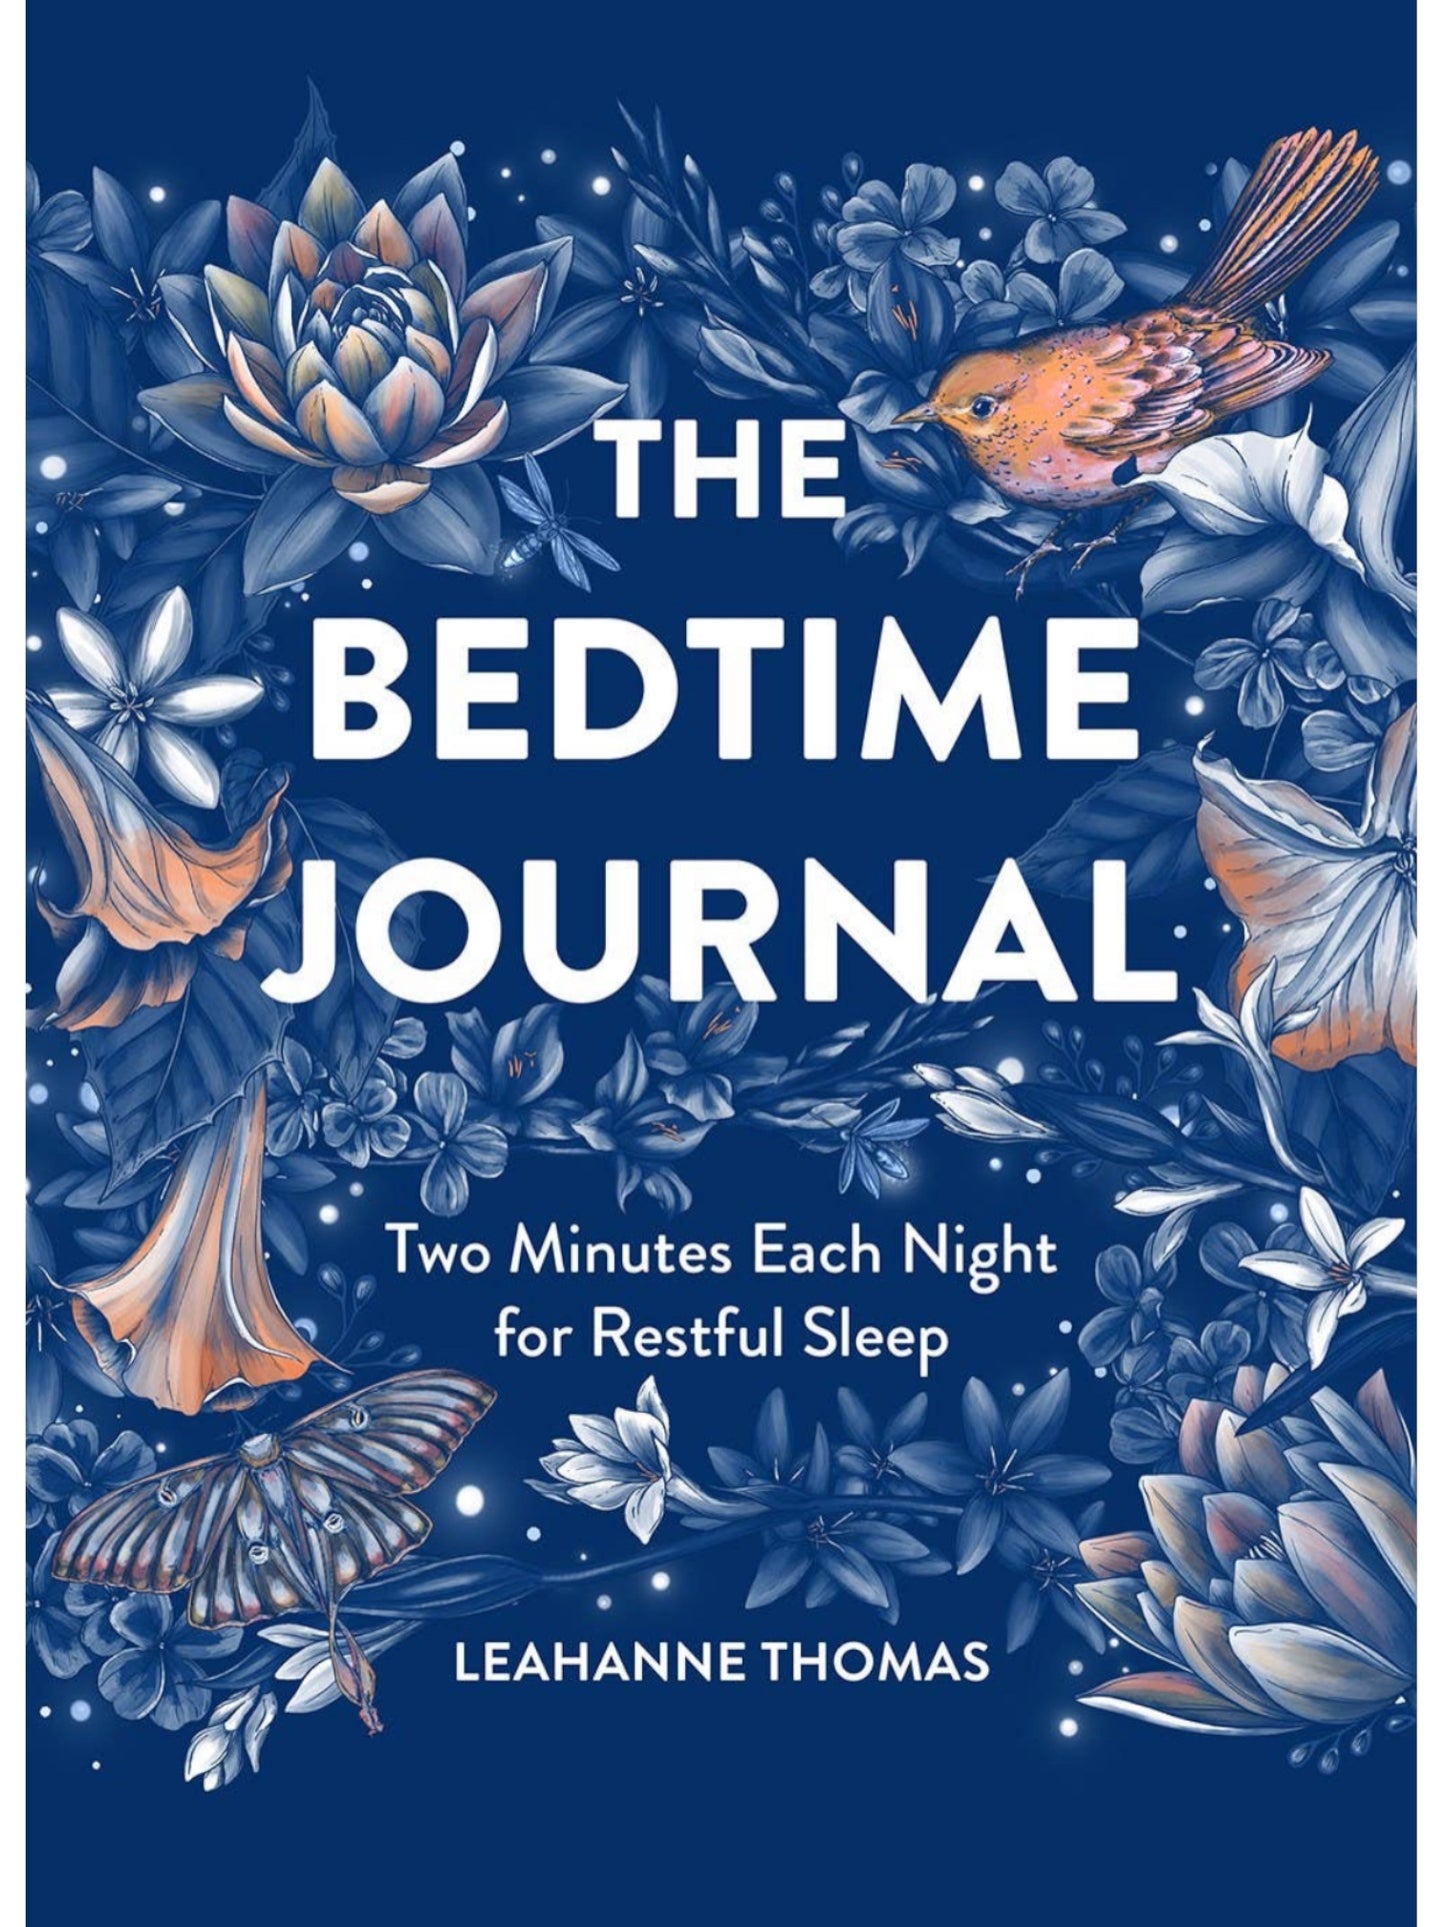 Bedtime Journal by Leahanne Thomas